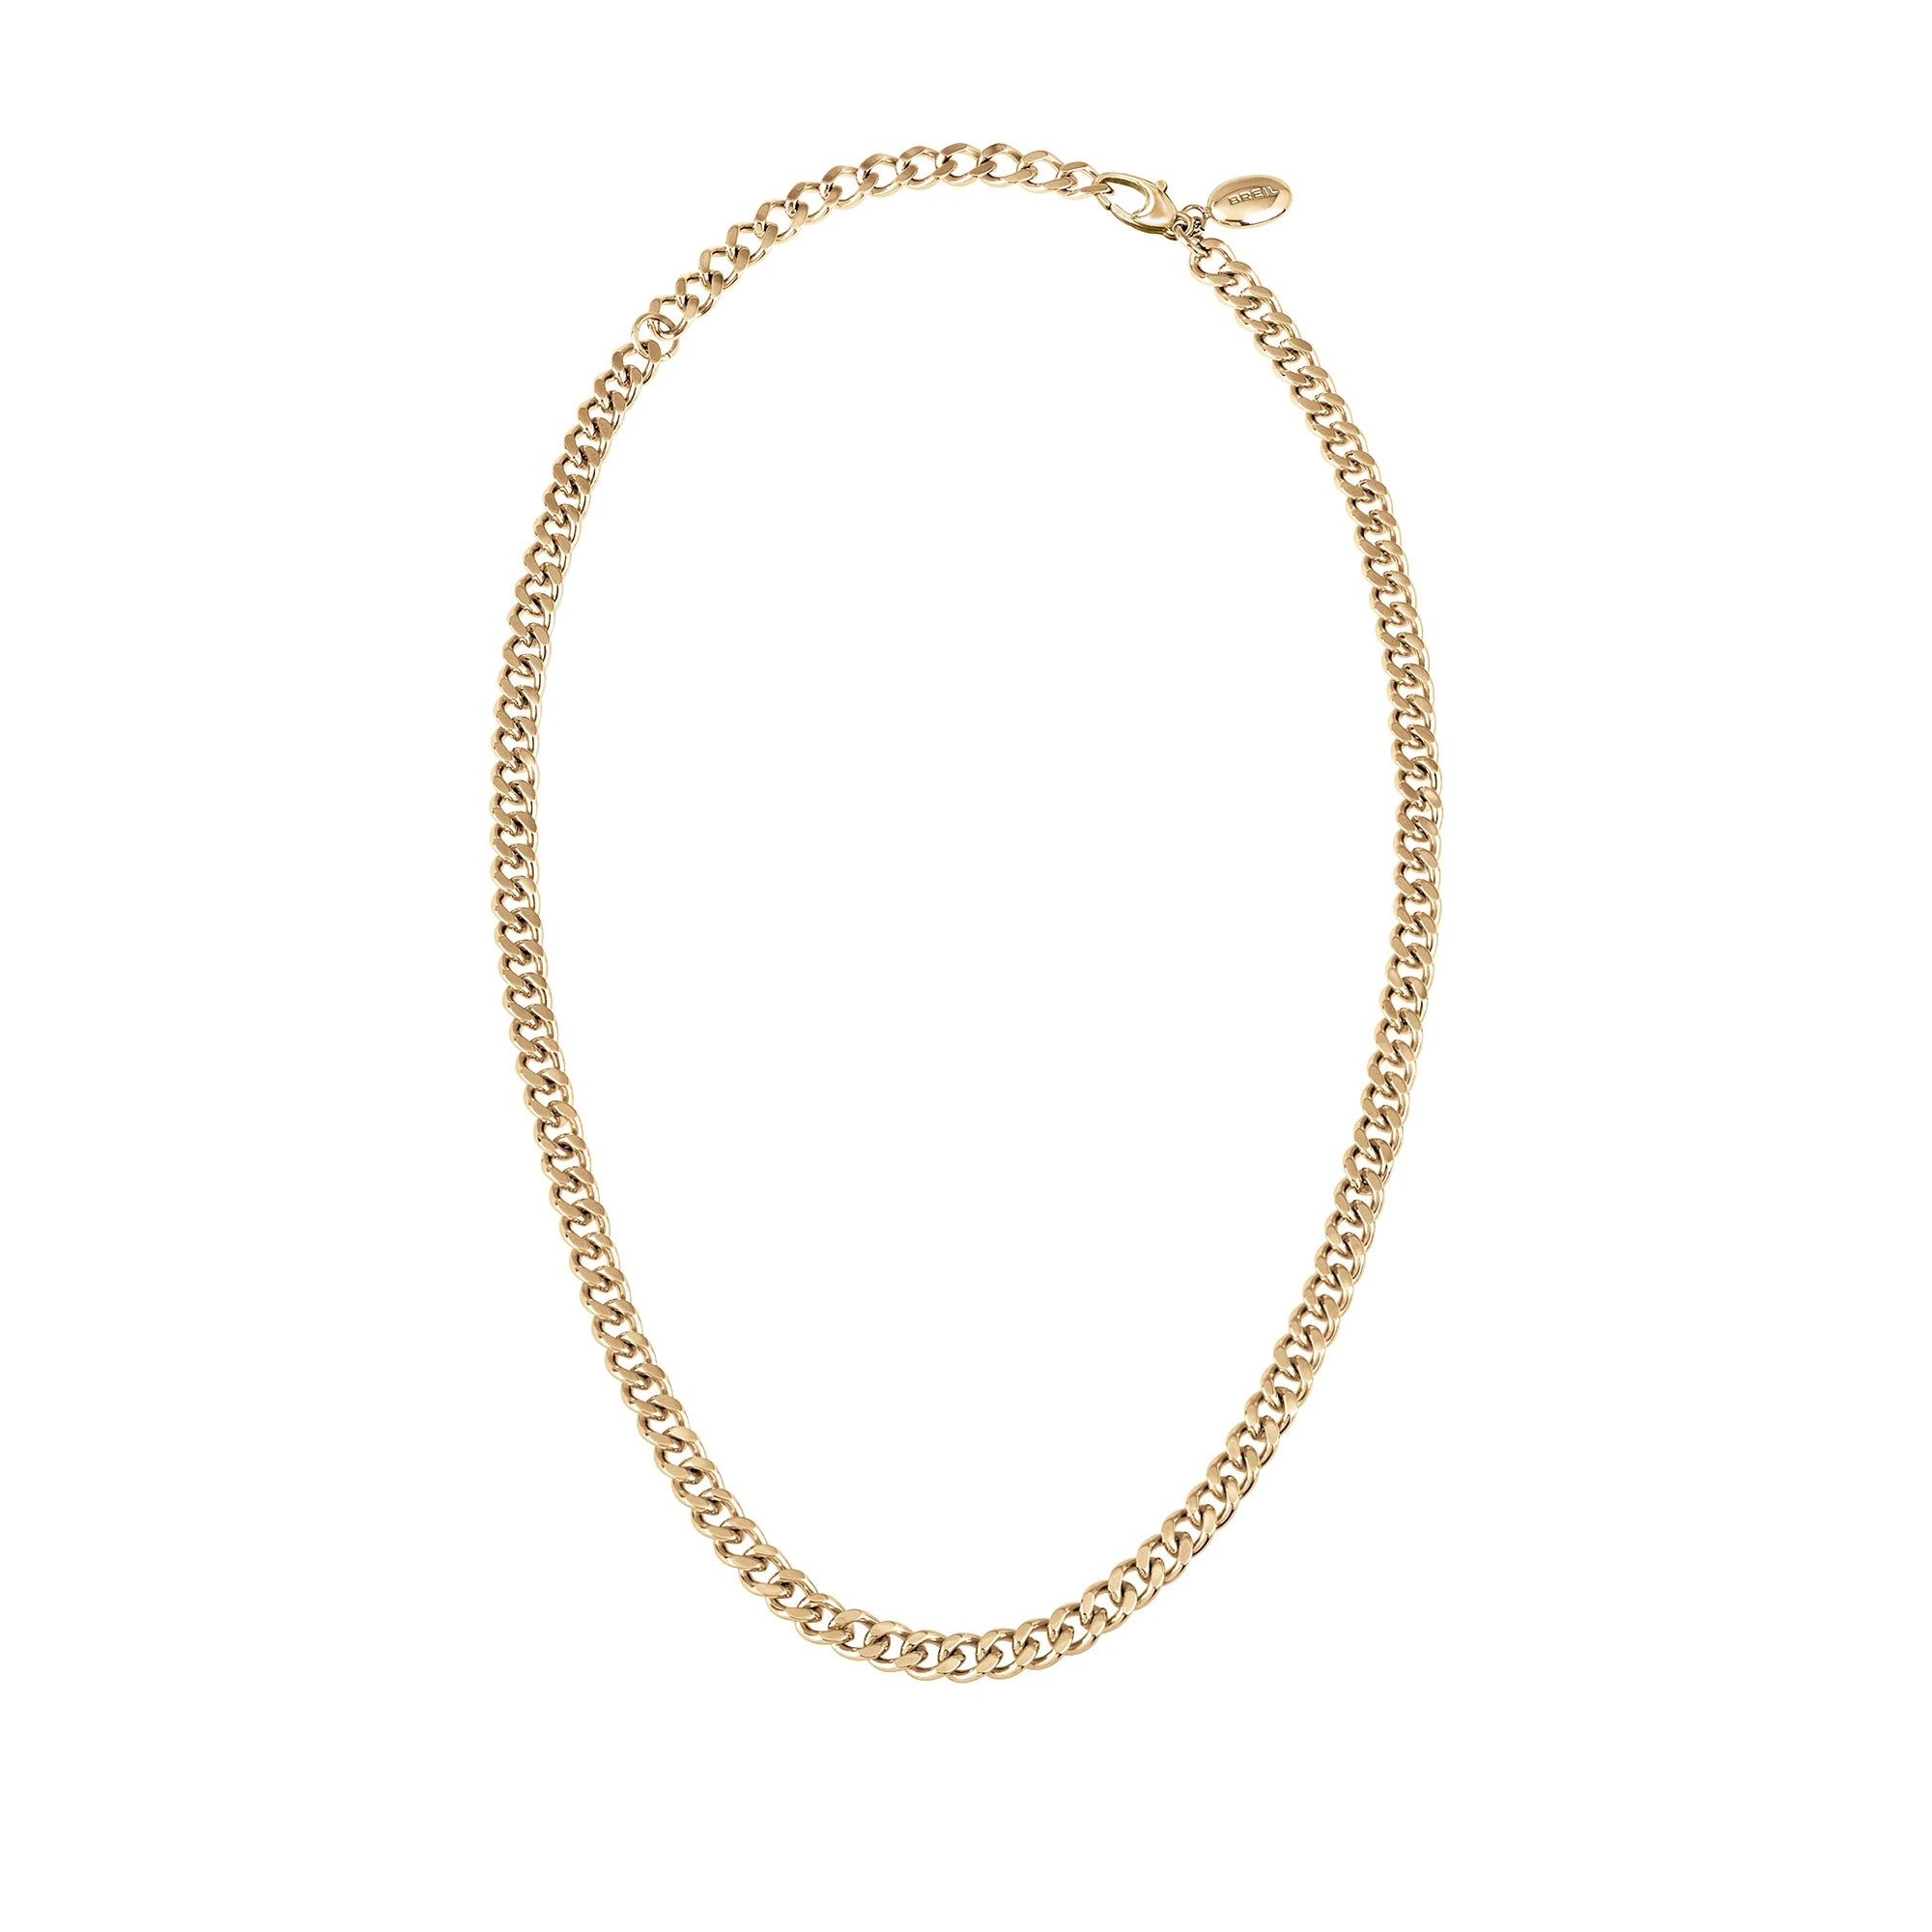 JOIN UP - COLLANA A CATENA IN ACCIAIO LUCIDO IP GOLD - 1 - TJ2916 | Breil